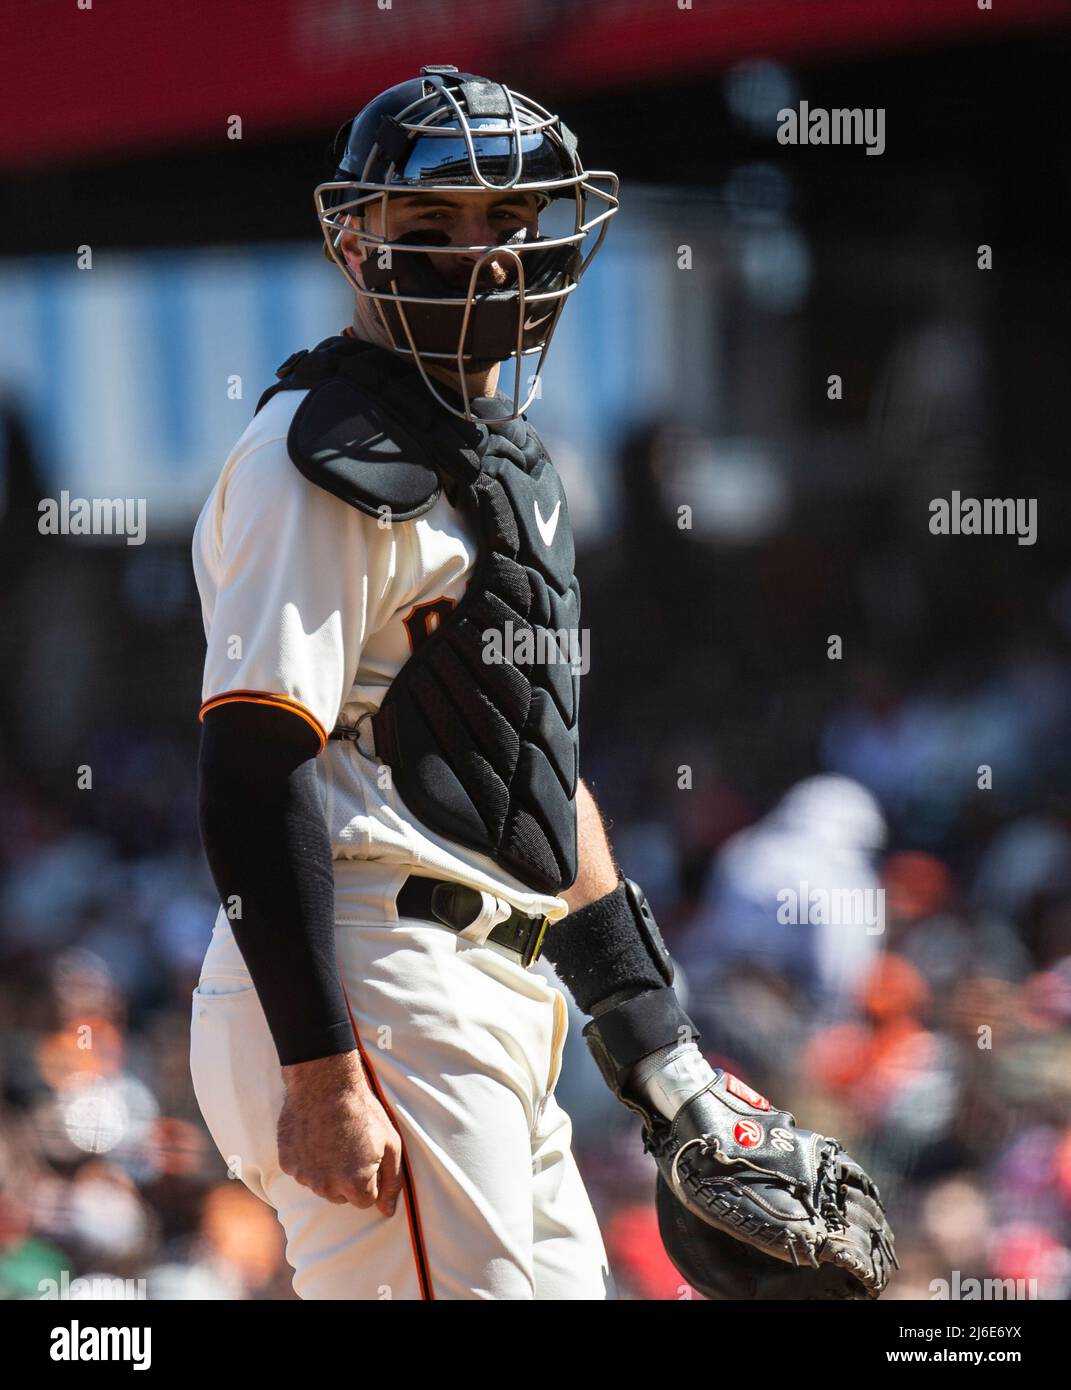 April 30 2022 San Francisco CA, U.S.A. San Francisco catcher Curt Casali (2) looks for a signal from the dugout during MLB game between the Washington Nationals and the San Francisco Giants. Giants won 9-3 at Oracle Park San Francisco Calif. Thurman James / CSM Stock Photo